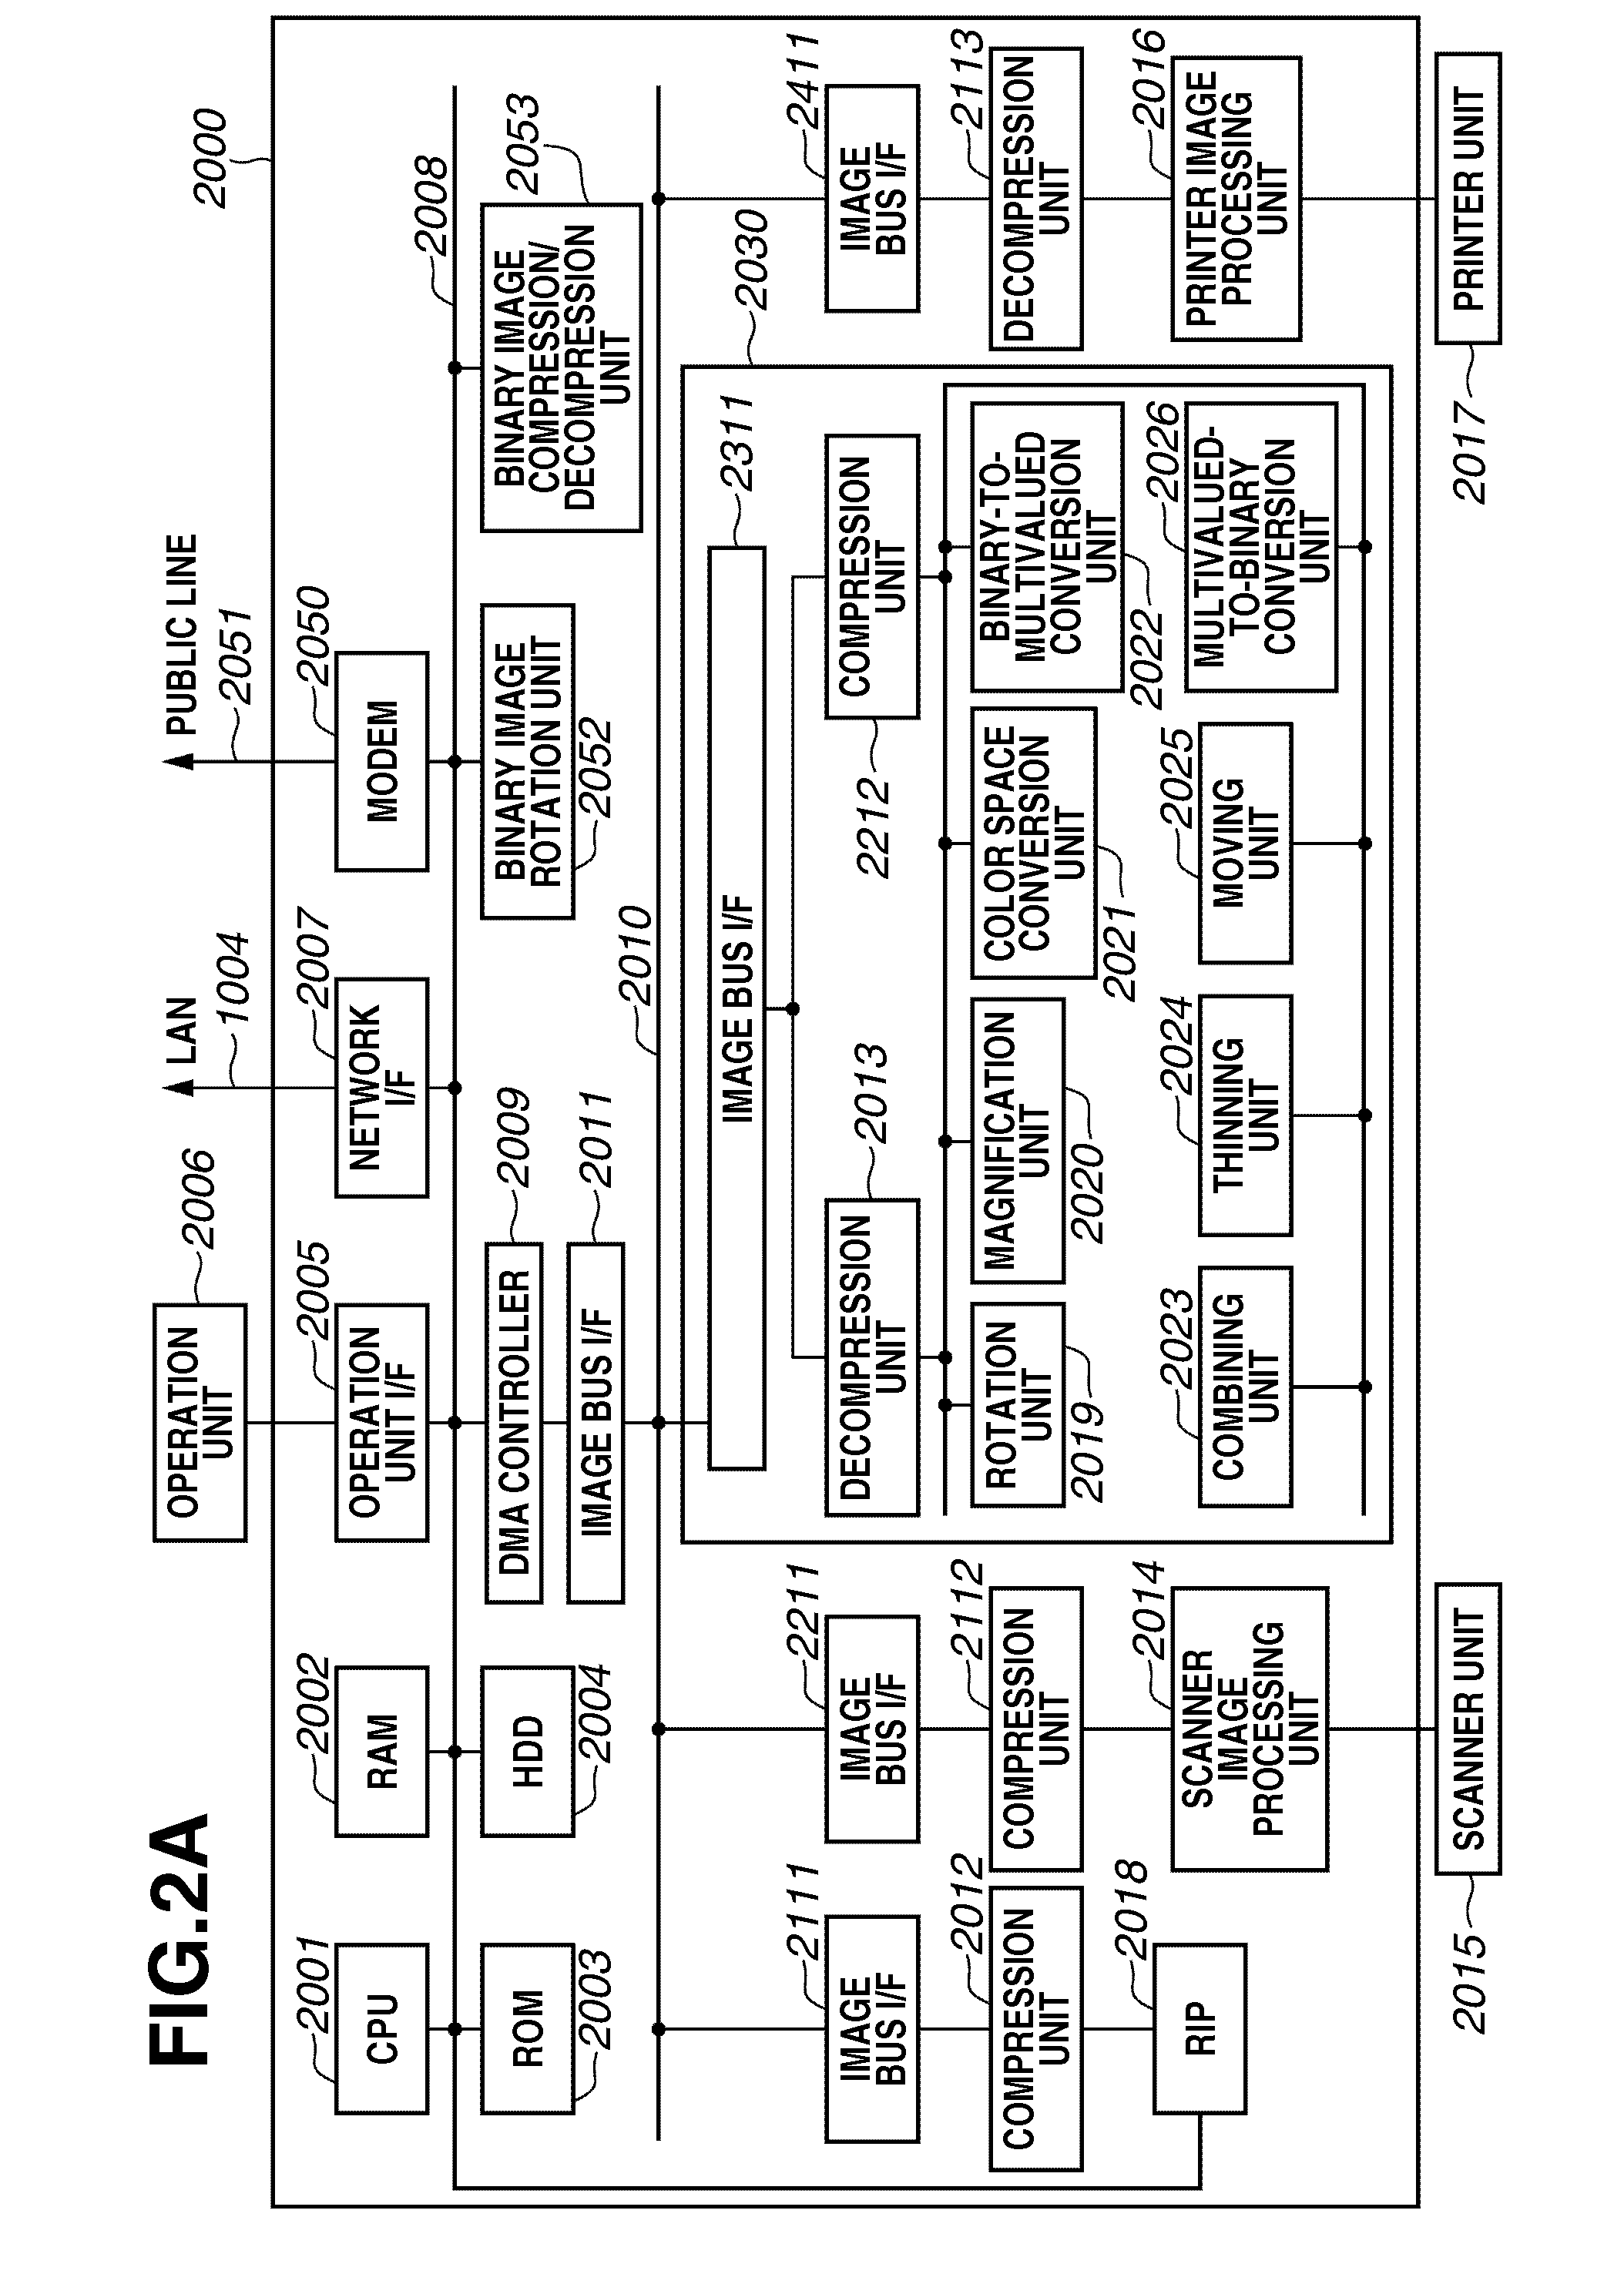 Remote control system, image processing apparatus, control method therefor, and recording medium storing program therefor